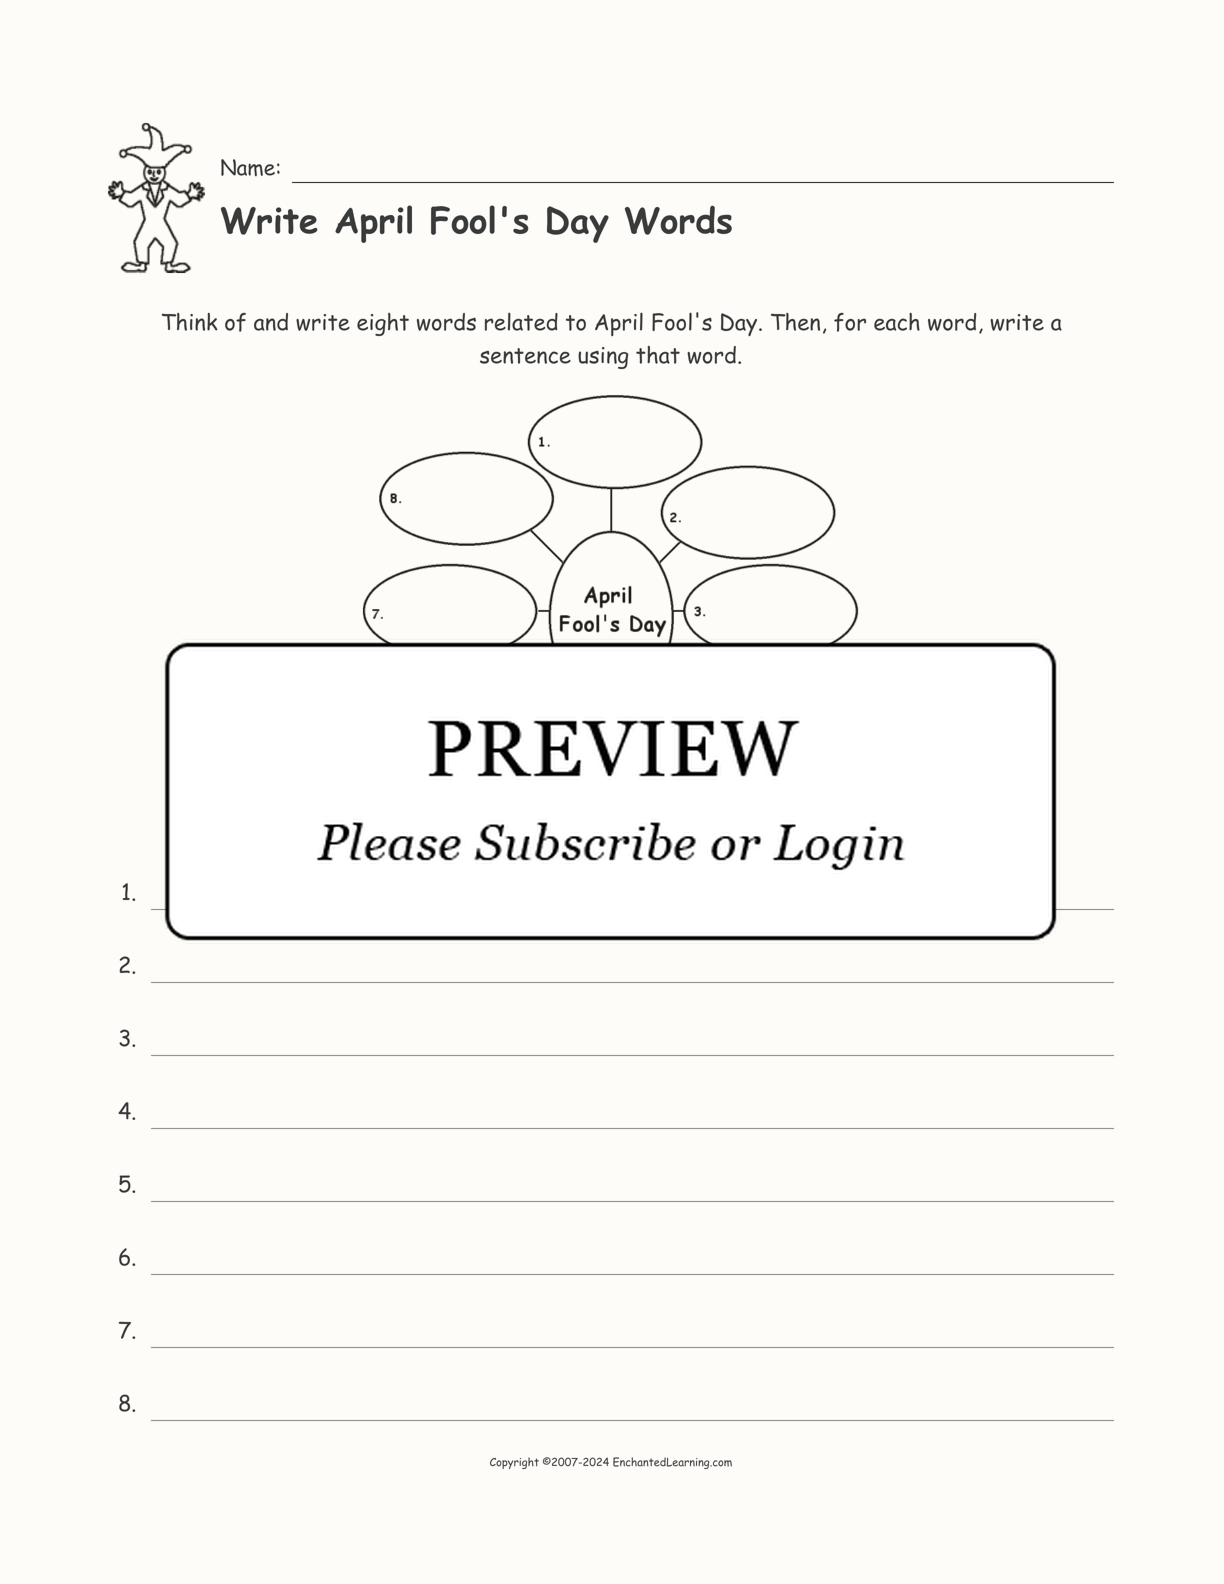 Write April Fool's Day Words interactive worksheet page 1